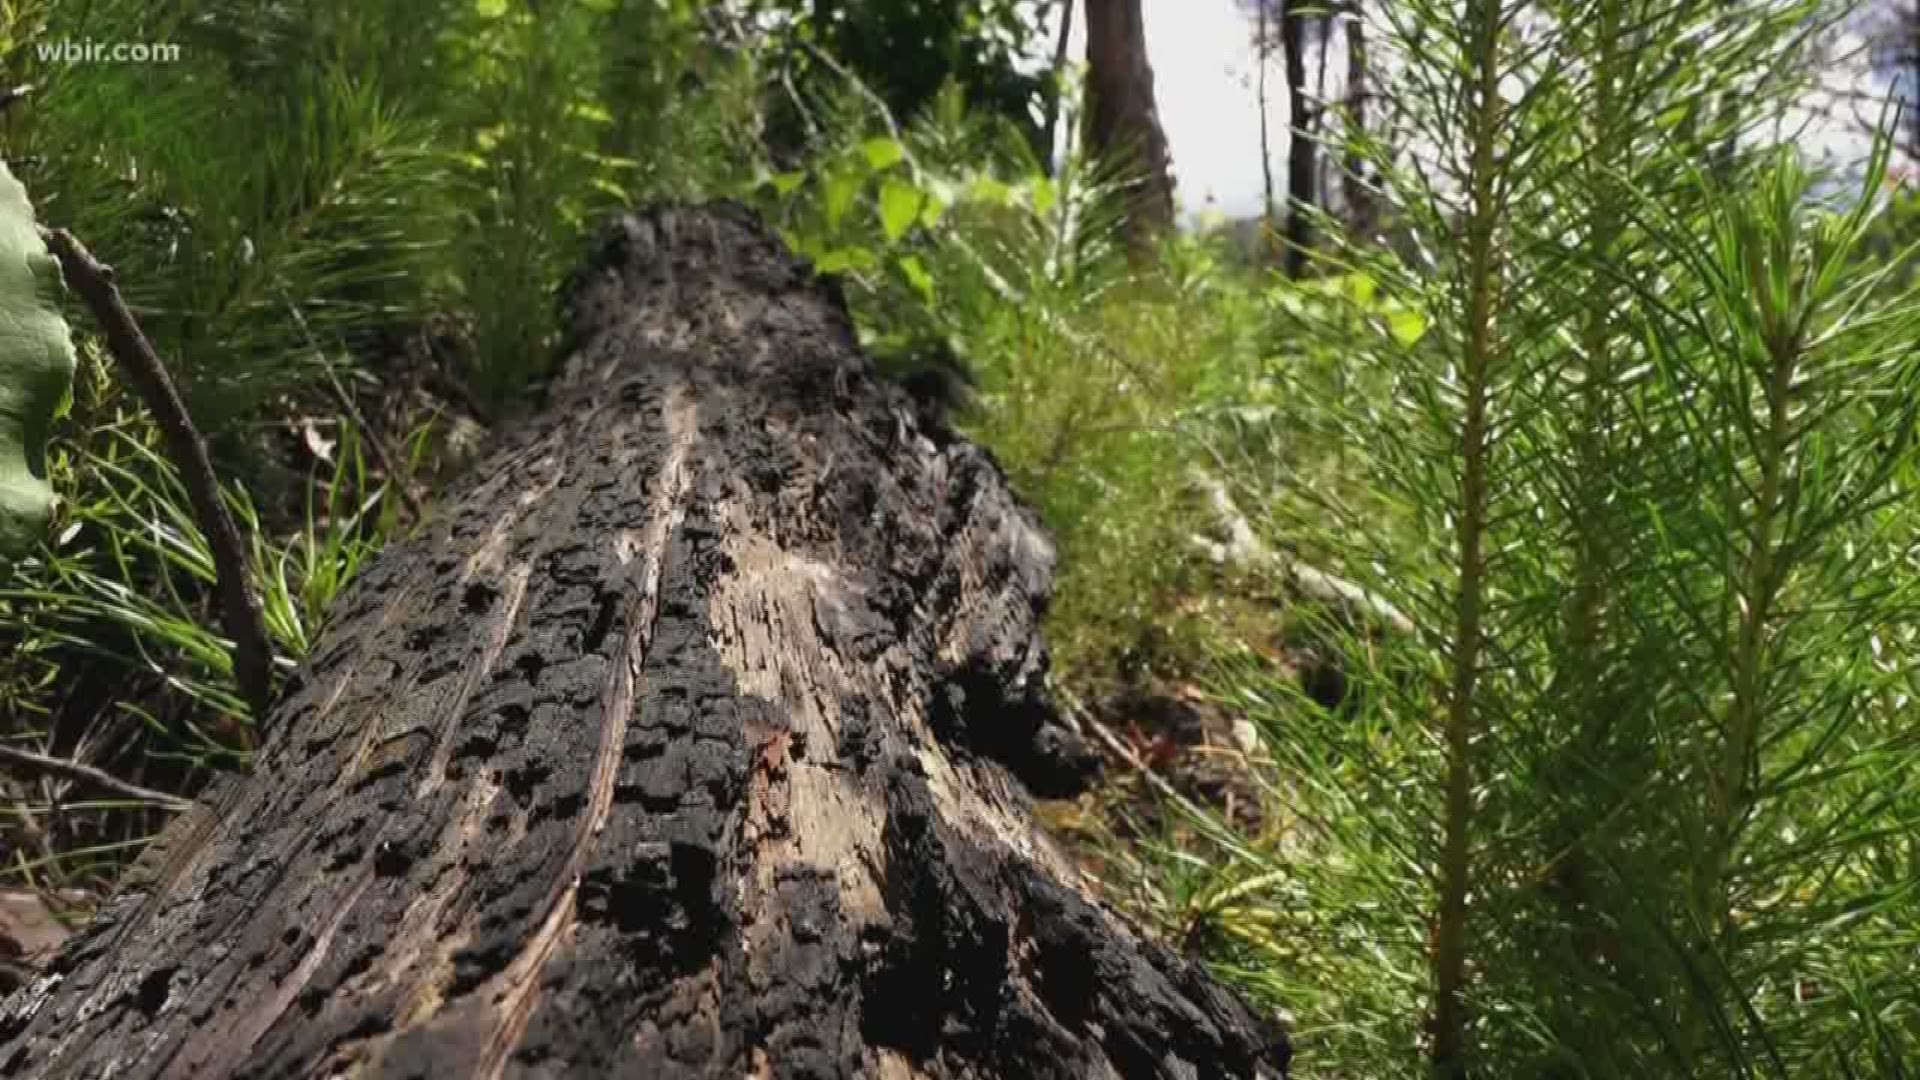 Jul. 5, 2018: Areas in the Smokies charred by the Nov. 2016 wildfires now feature abundant new growth, including the Table Mountain pine that relies on fire to reproduce.